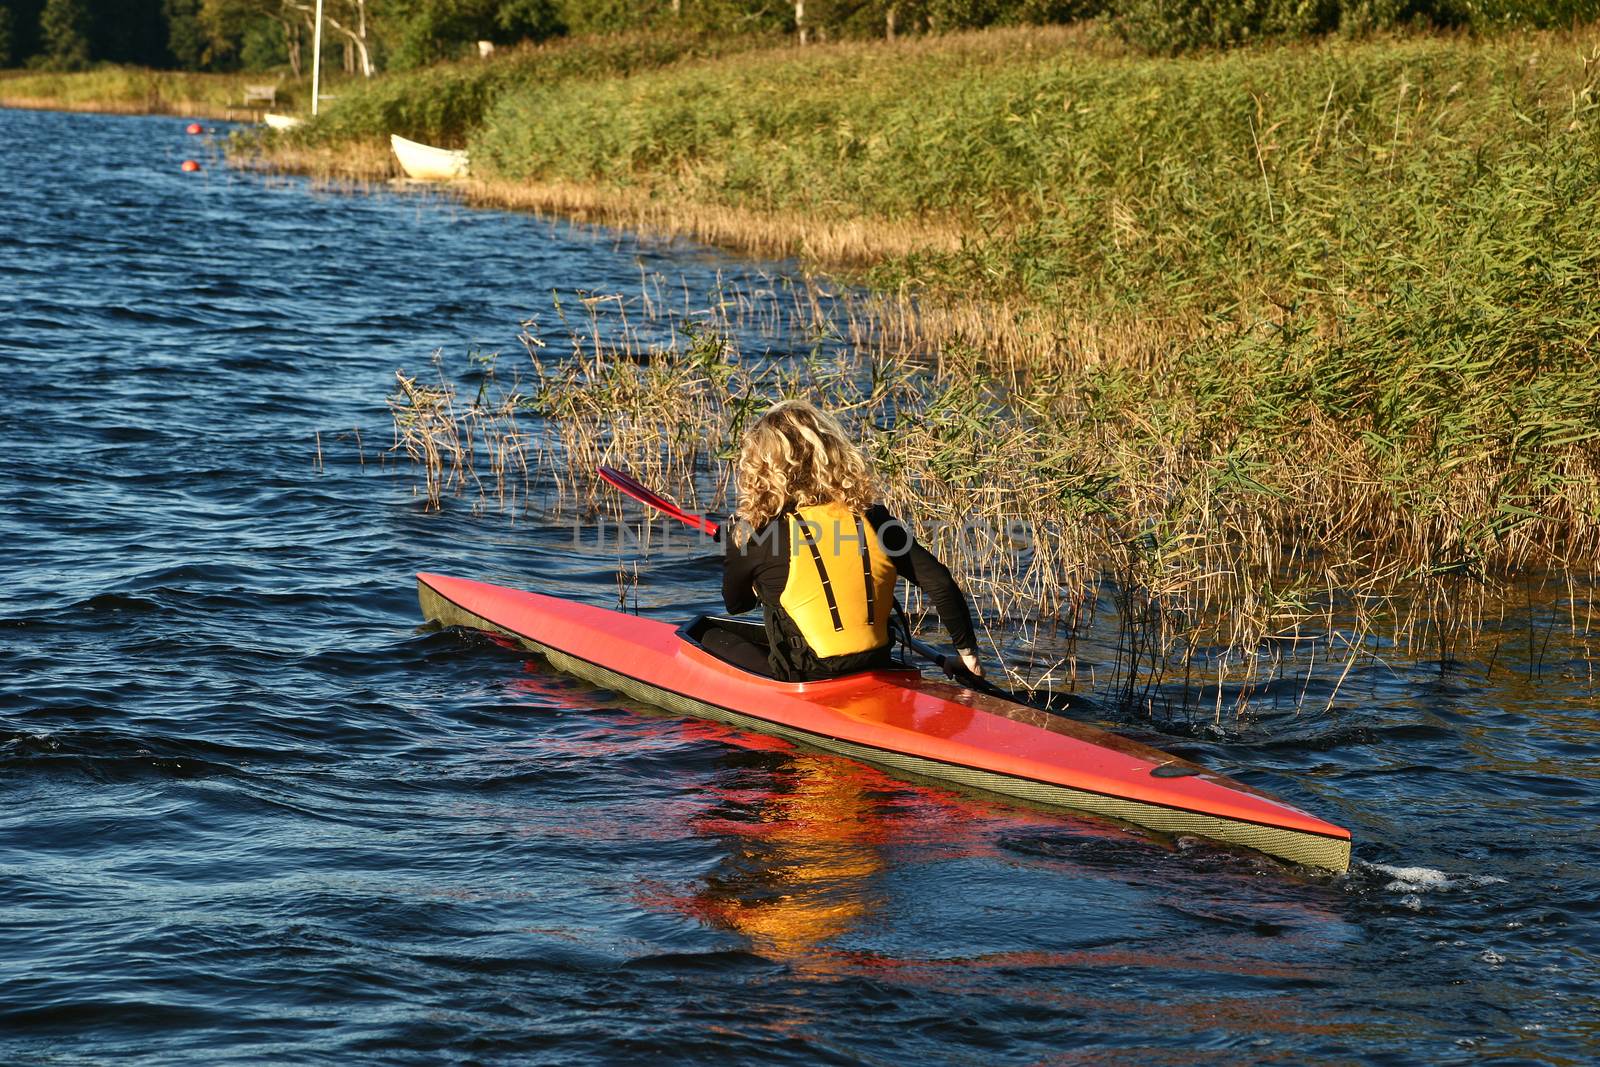 Blond girl on a kayak on a lake in Denmark